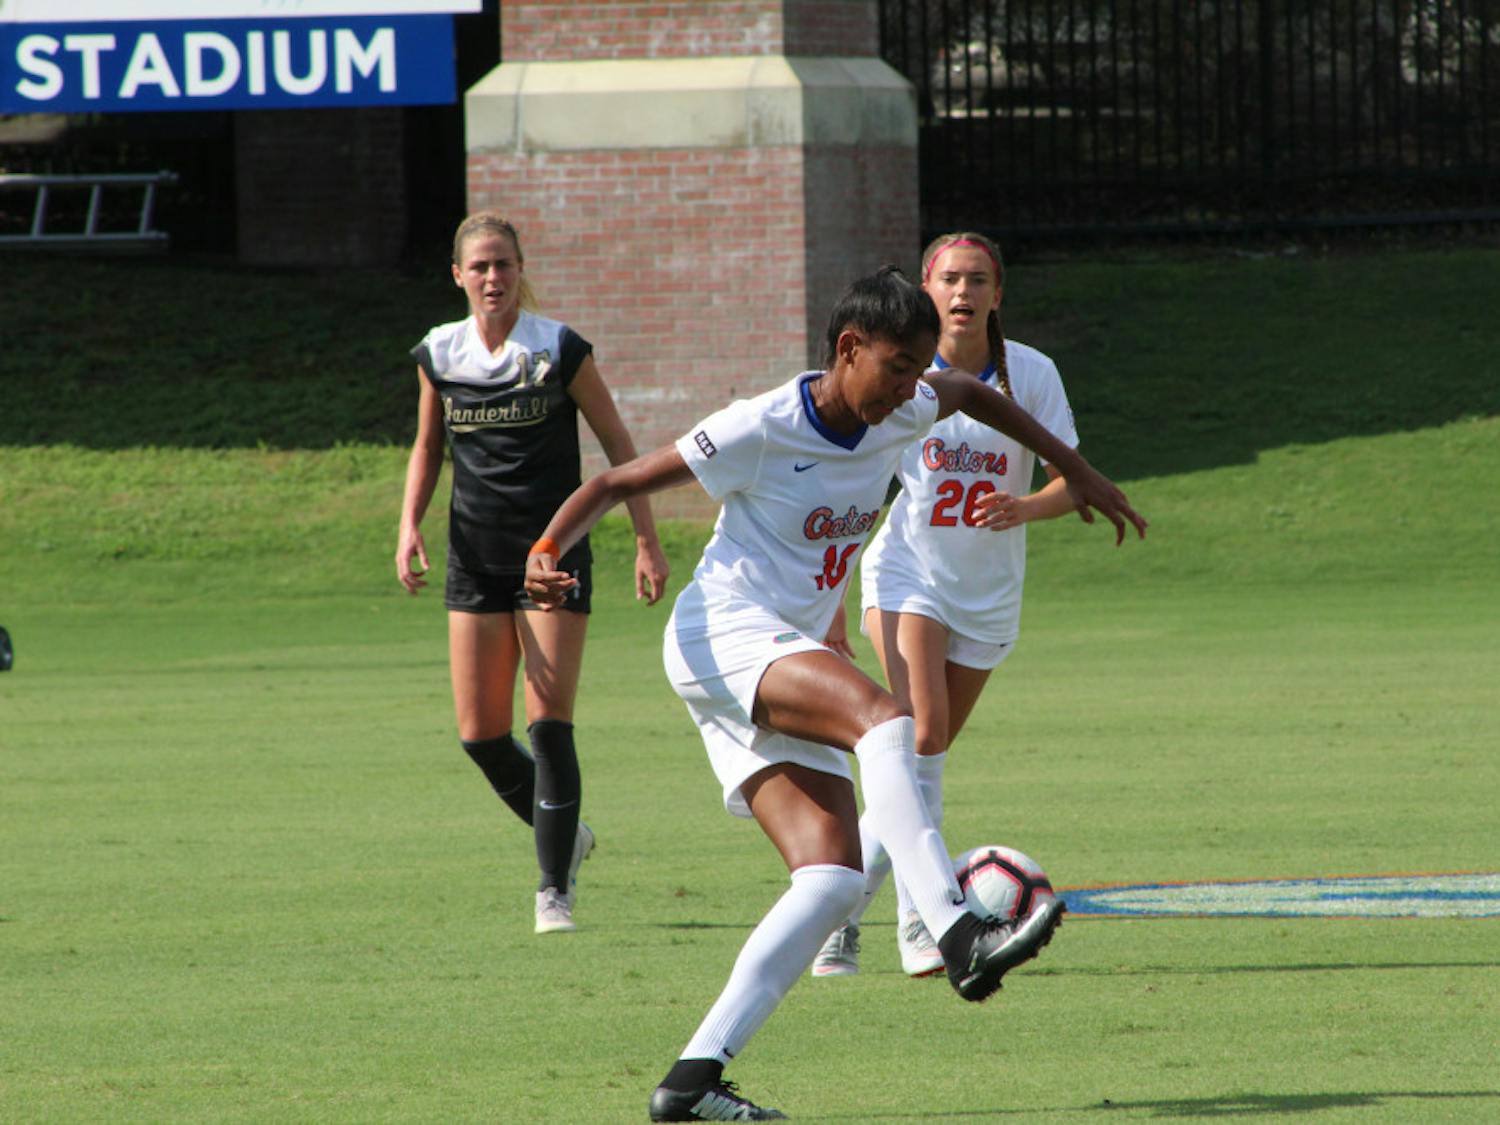 Senior Lais Araujo finally broke UF's scoreless streak (six games) with a goal in the 78th minute of the 2-1 home loss to the Commodores on Sunday.